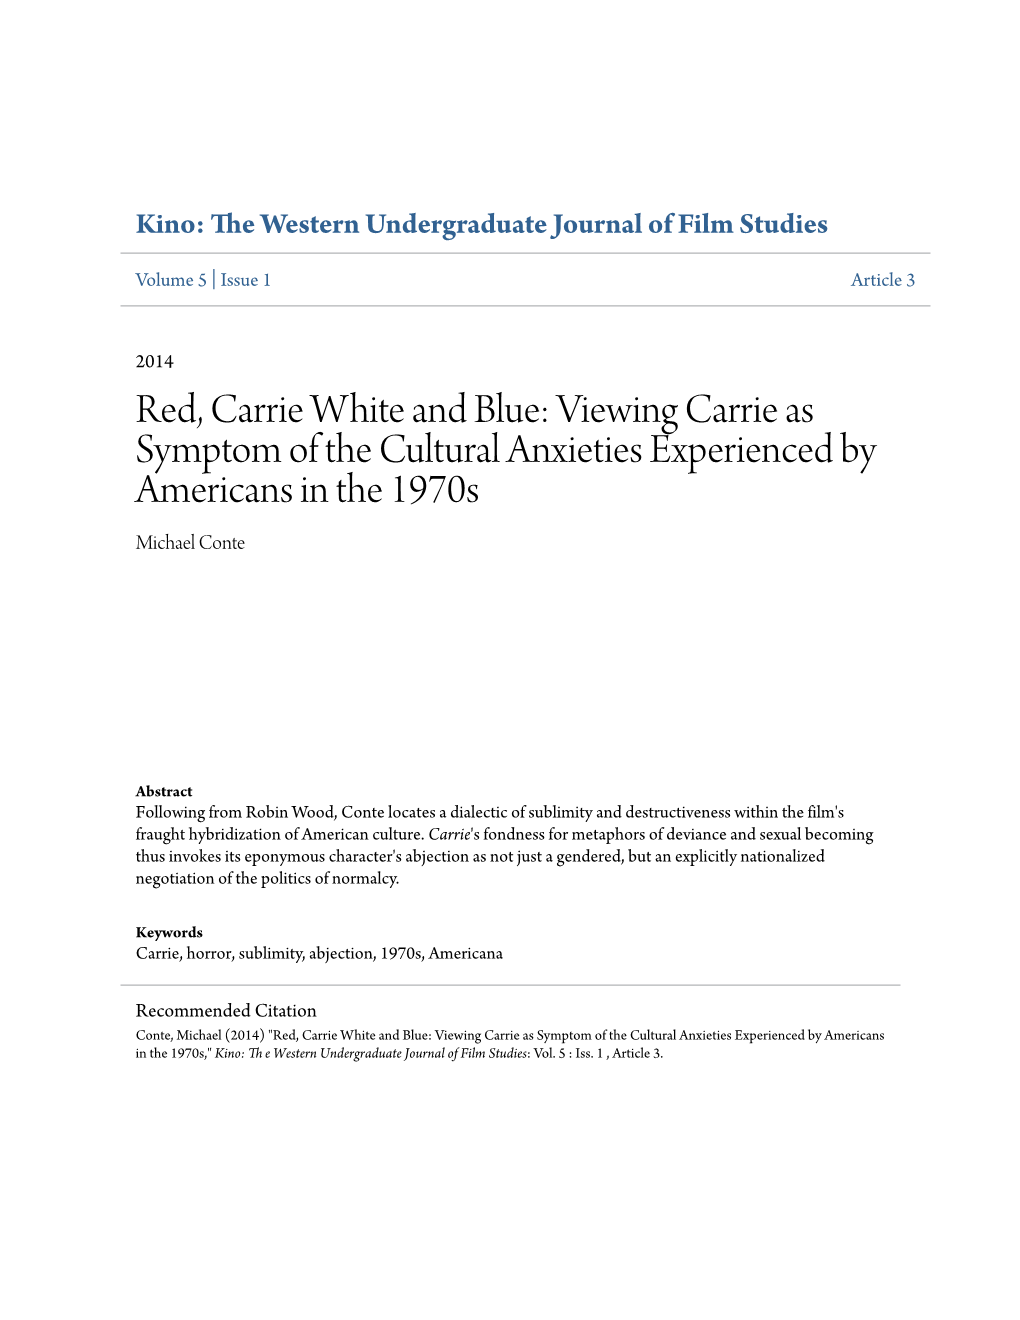 Red, Carrie White and Blue: Viewing Carrie As Symptom of the Cultural Anxieties Experienced by Americans in the 1970S Michael Conte